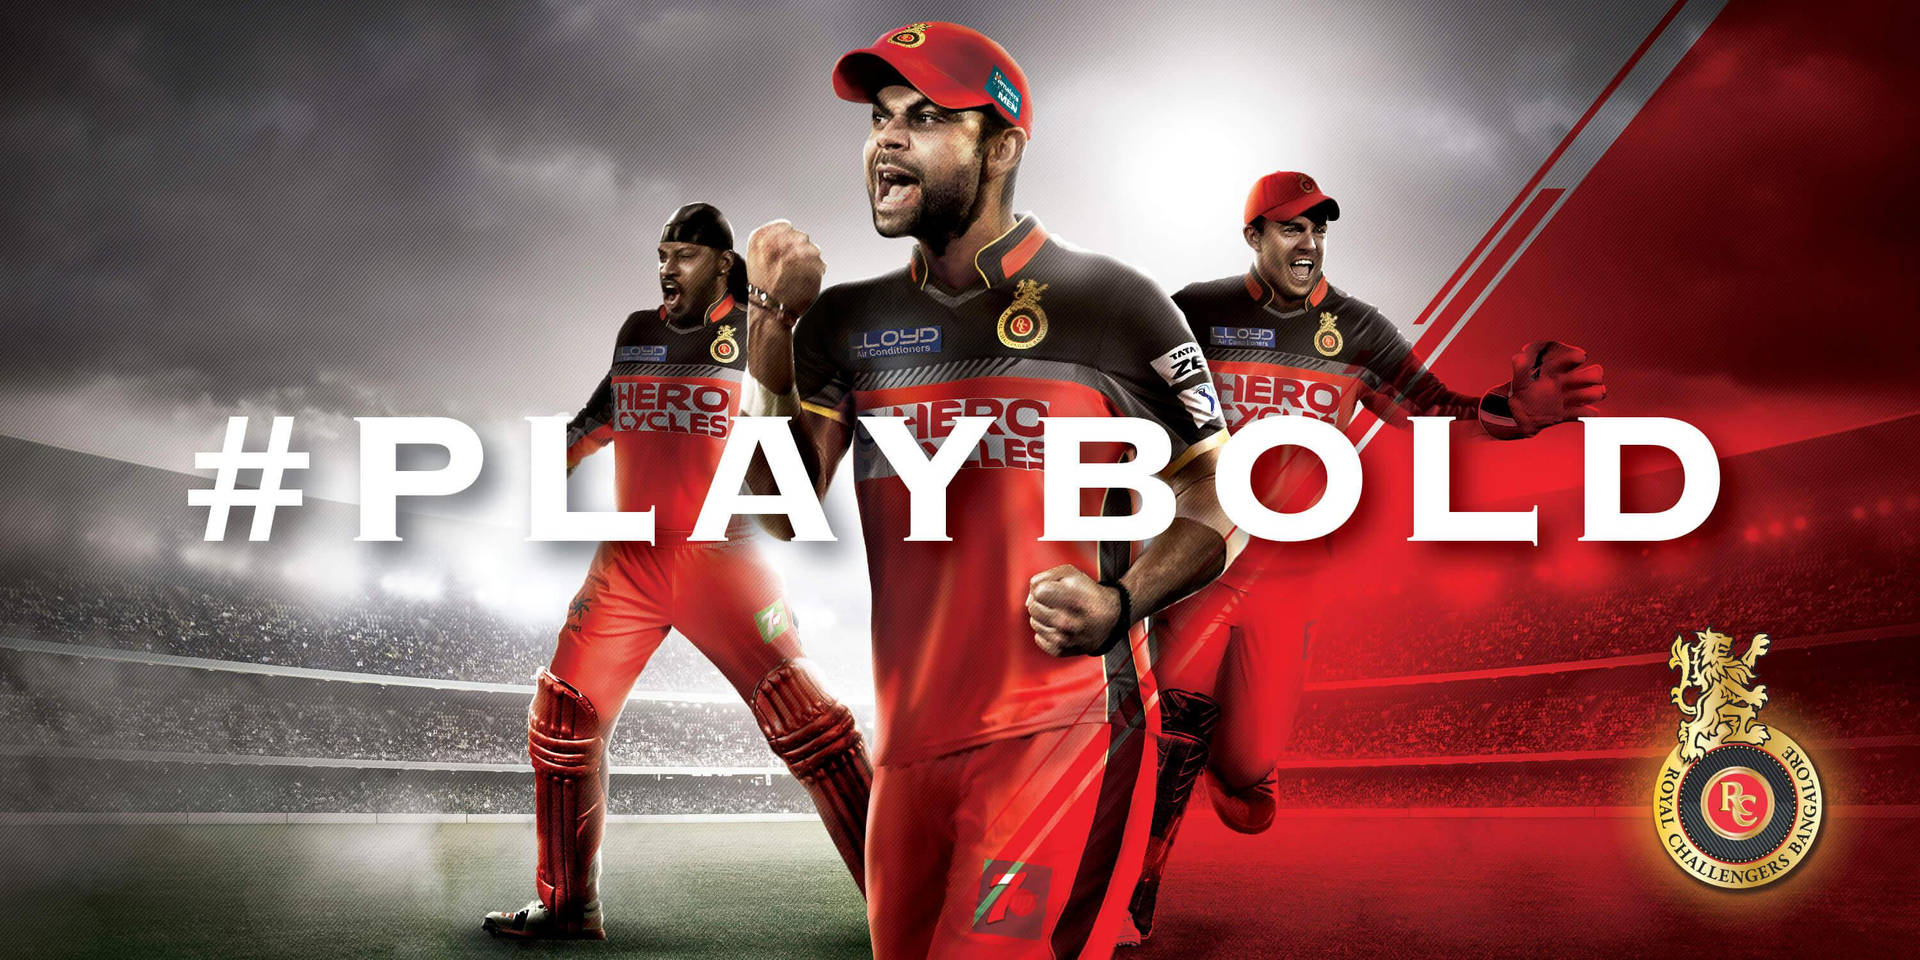 Royal Challengers Bangalore Play Bold Background